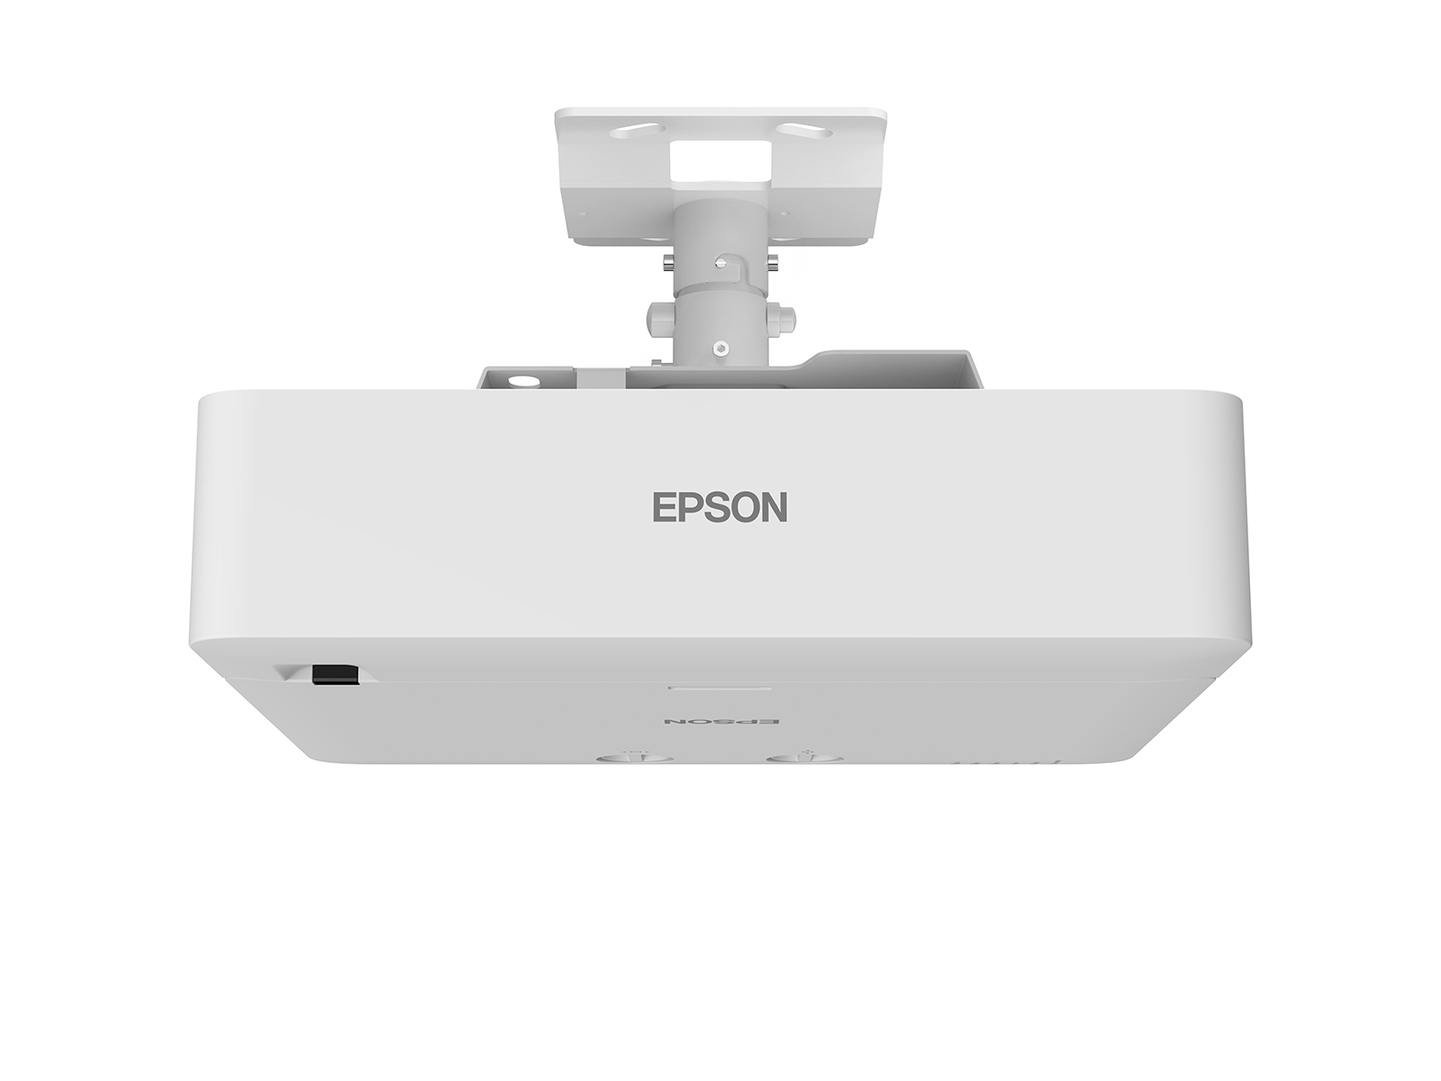 Epson Expands Range of High Brightness Fixed Lens Laser Projectors